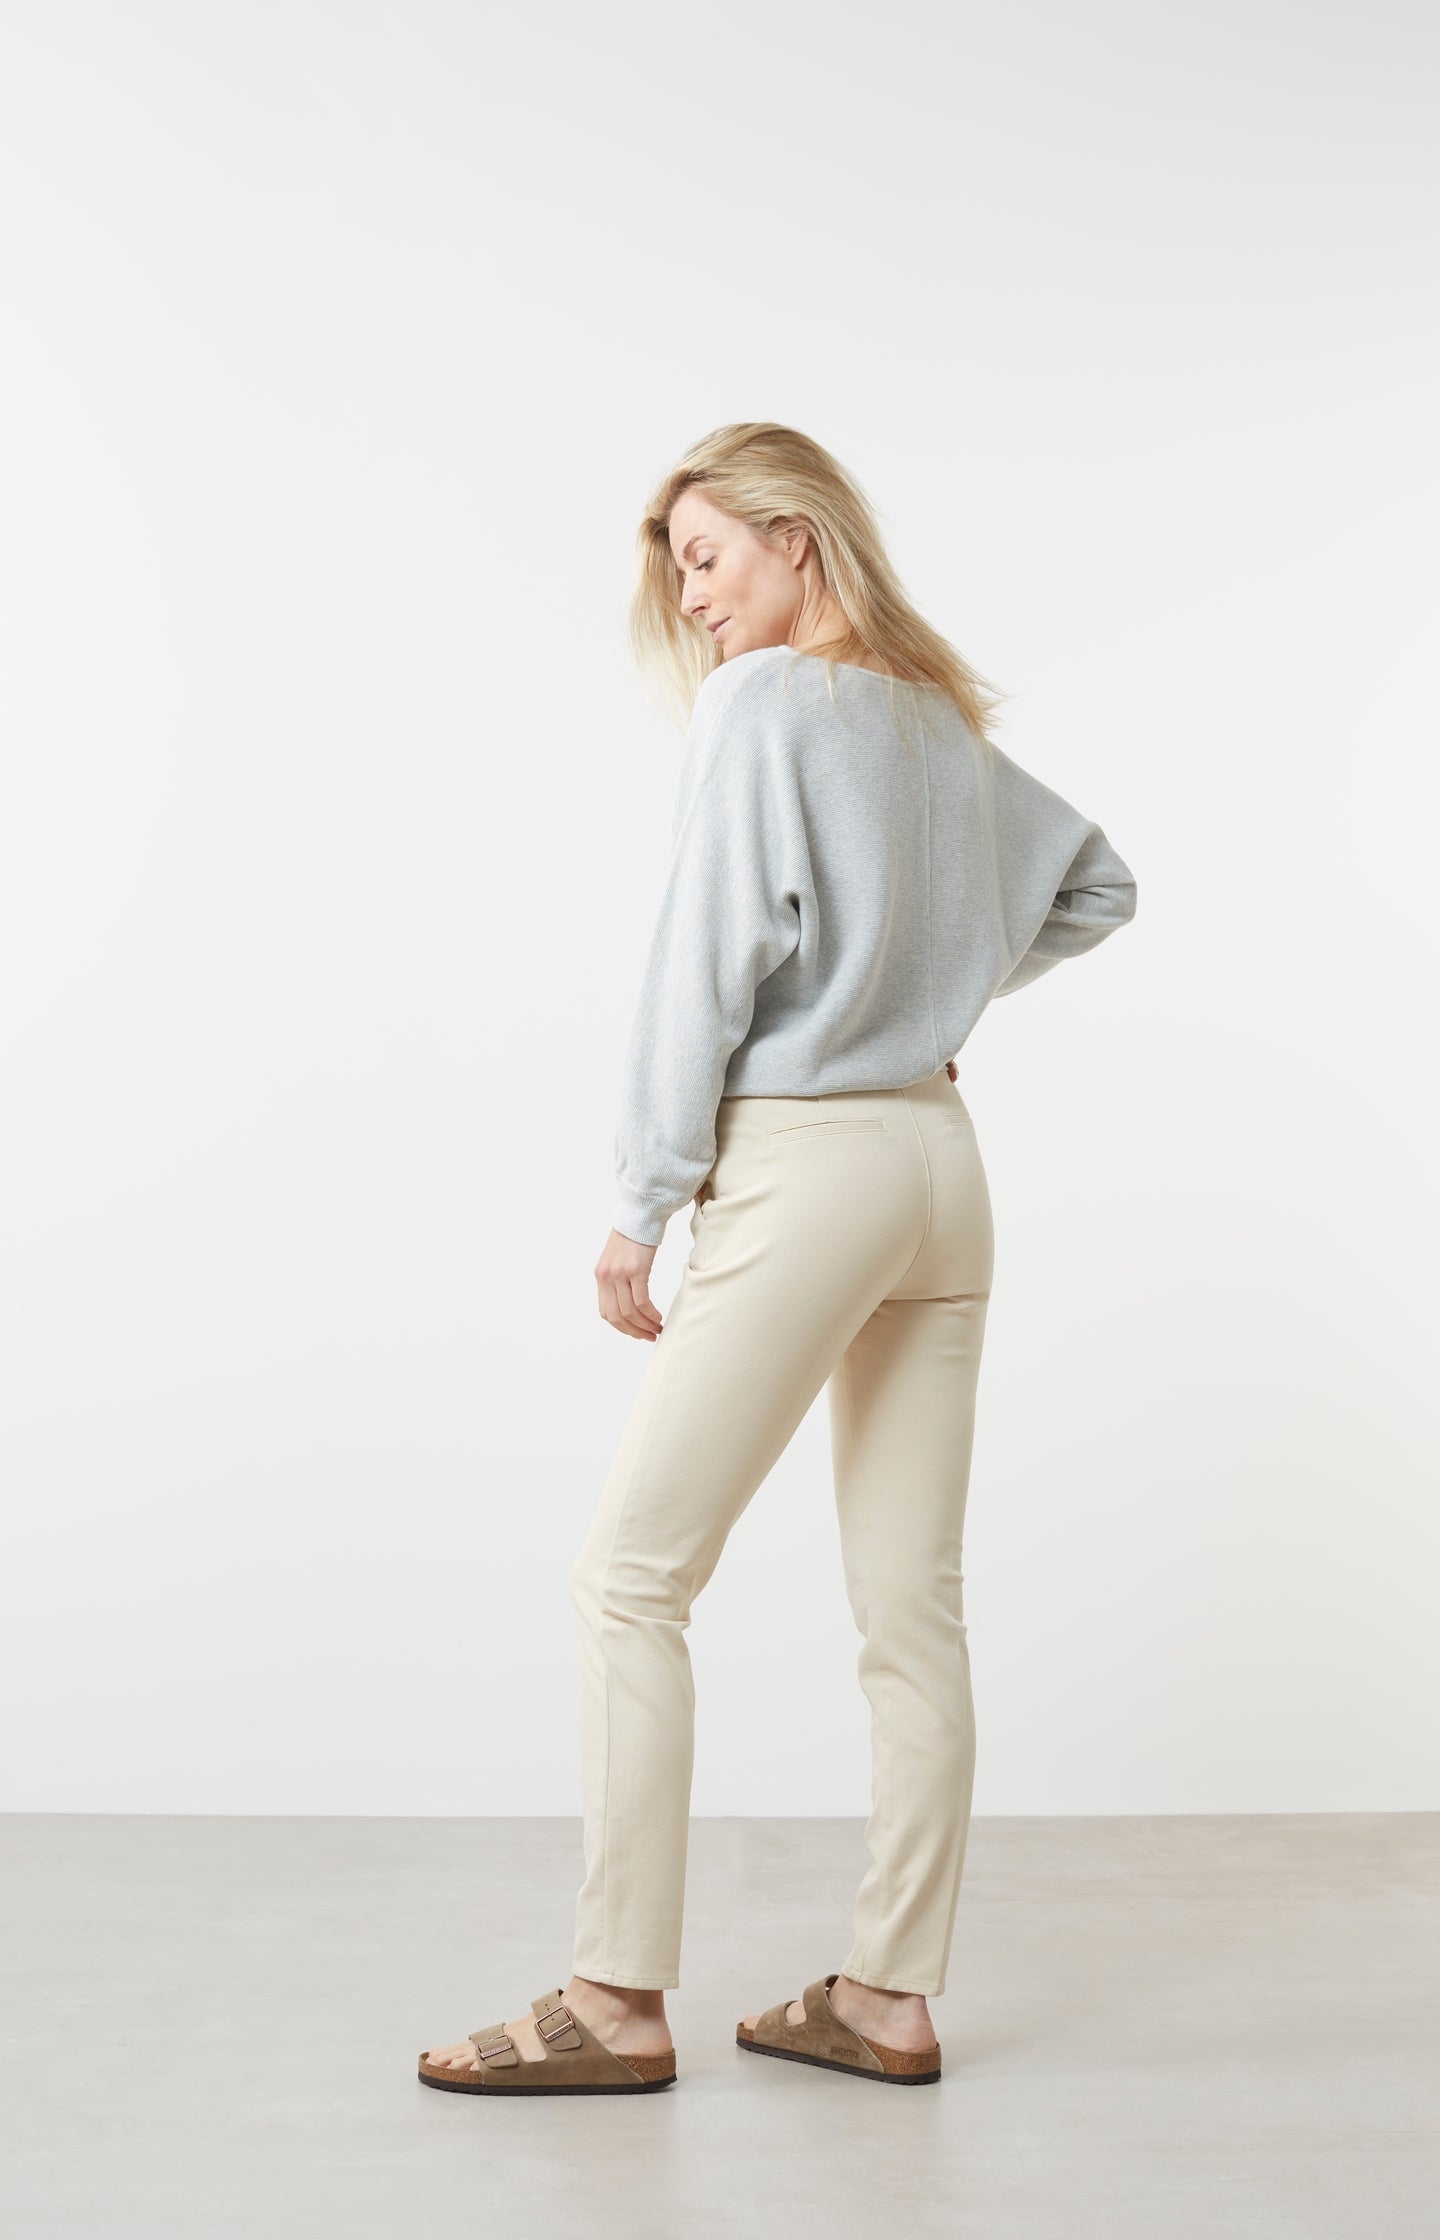 Boatneck sweater with long batwing sleeves in a relaxed fit - Type: lookbook